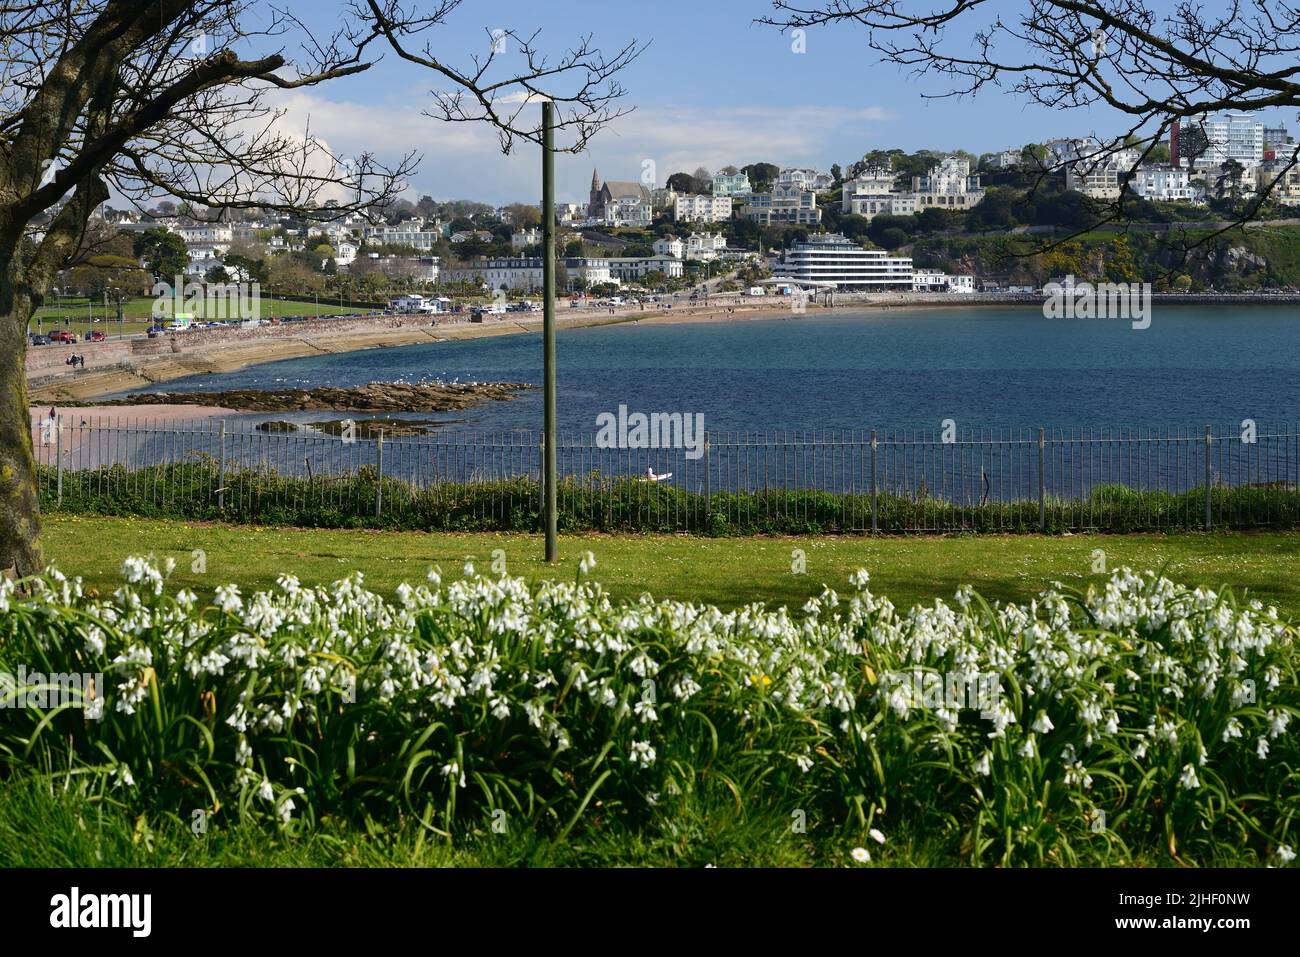 Spring wildflowers growing at Corbyn Head, Torquay, overlooking Abbey Sands. Stock Photo